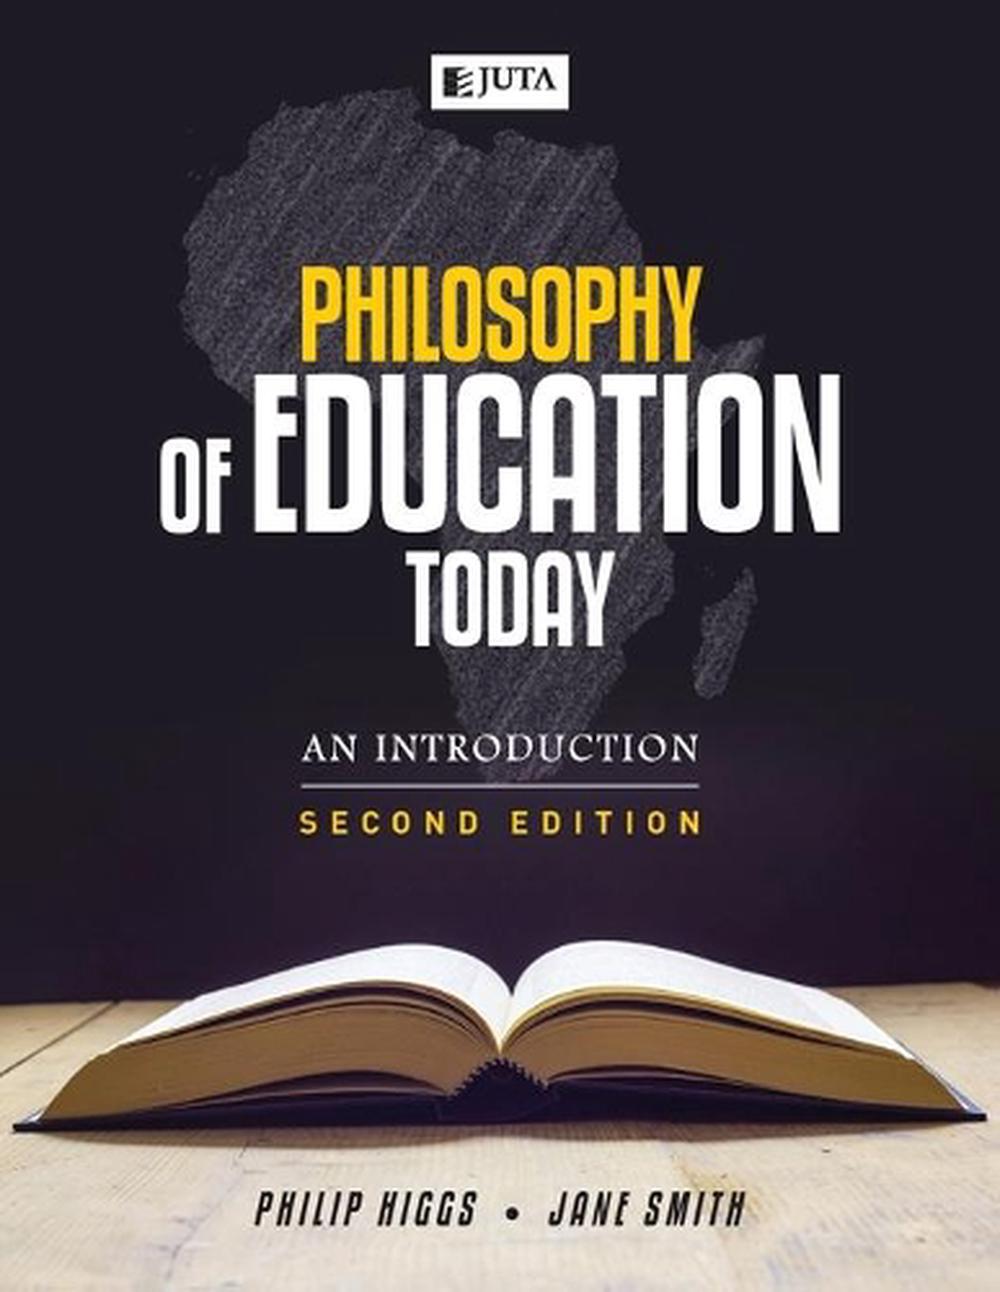 books on education business